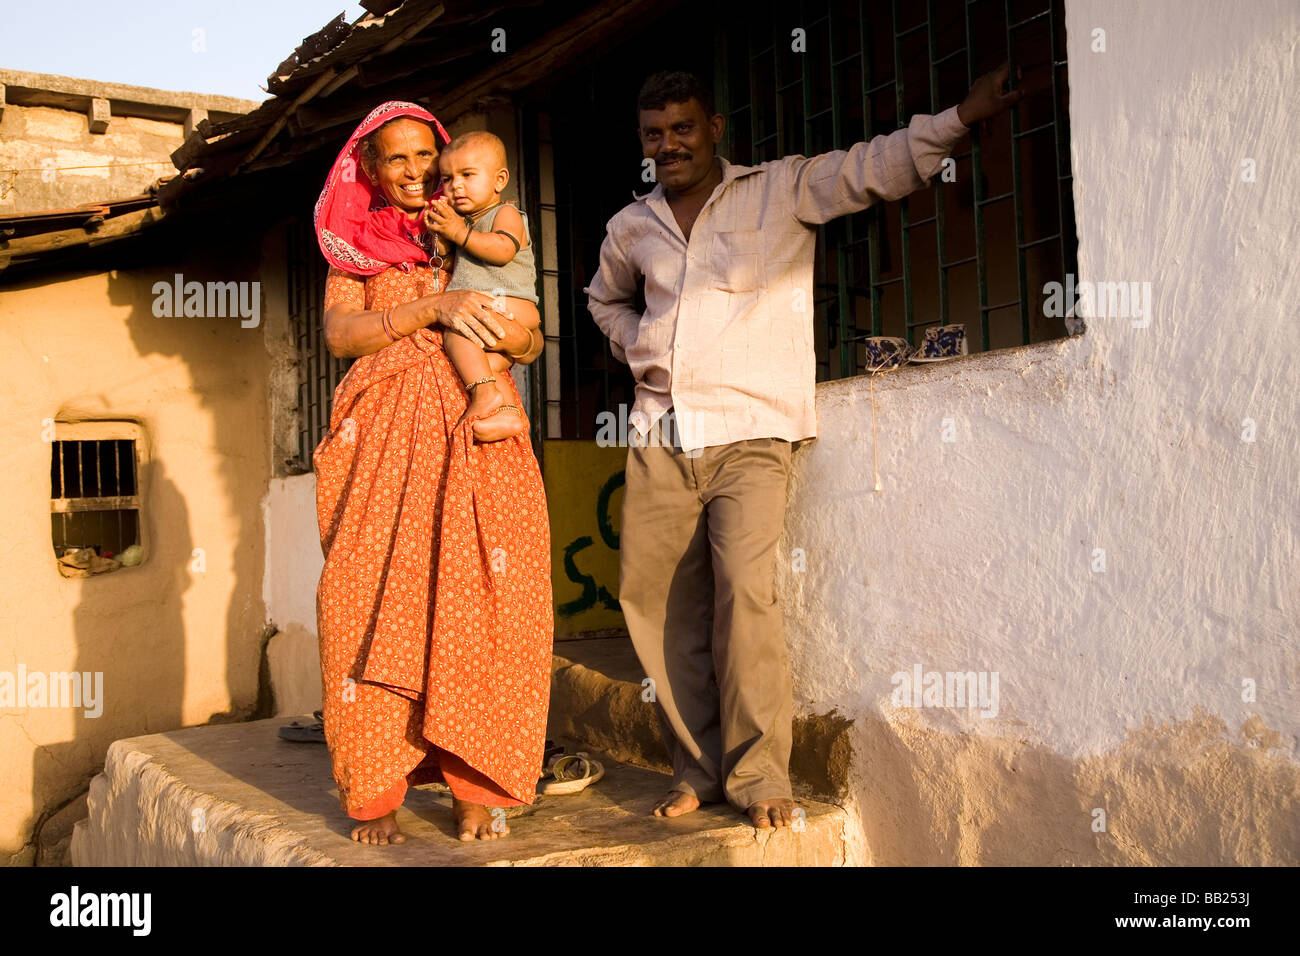 A typical rural house and family in the Gujarati town of Sasan, India. The woman in a red sari holds her grandson. Stock Photo